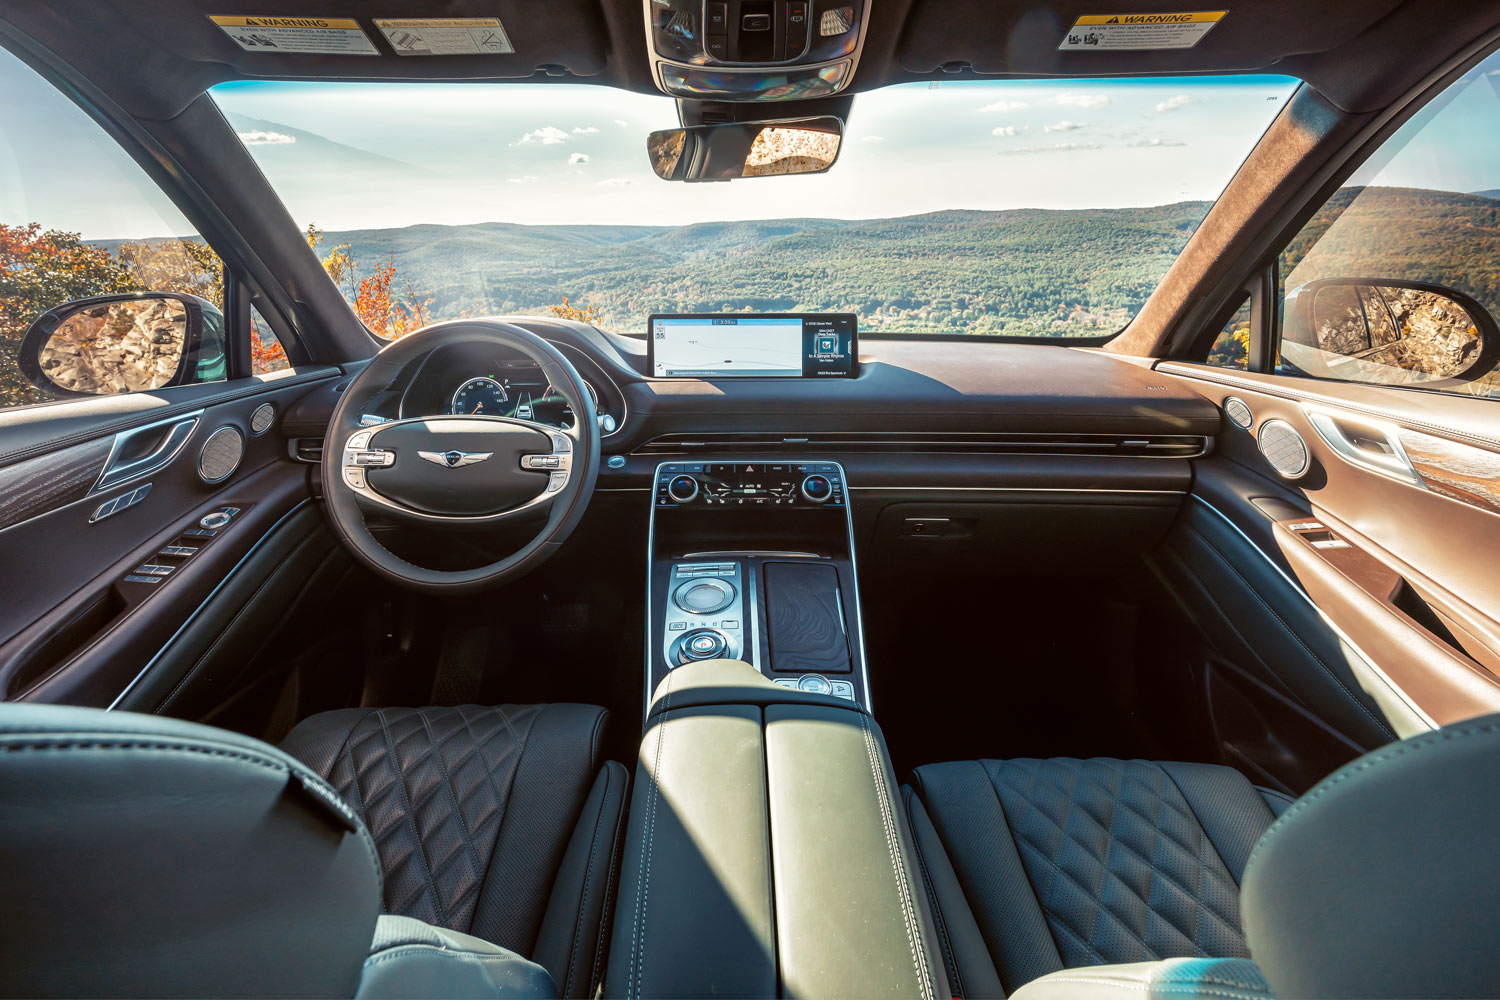 2023 Genesis GV80 interior, front seats, and infotainment screen